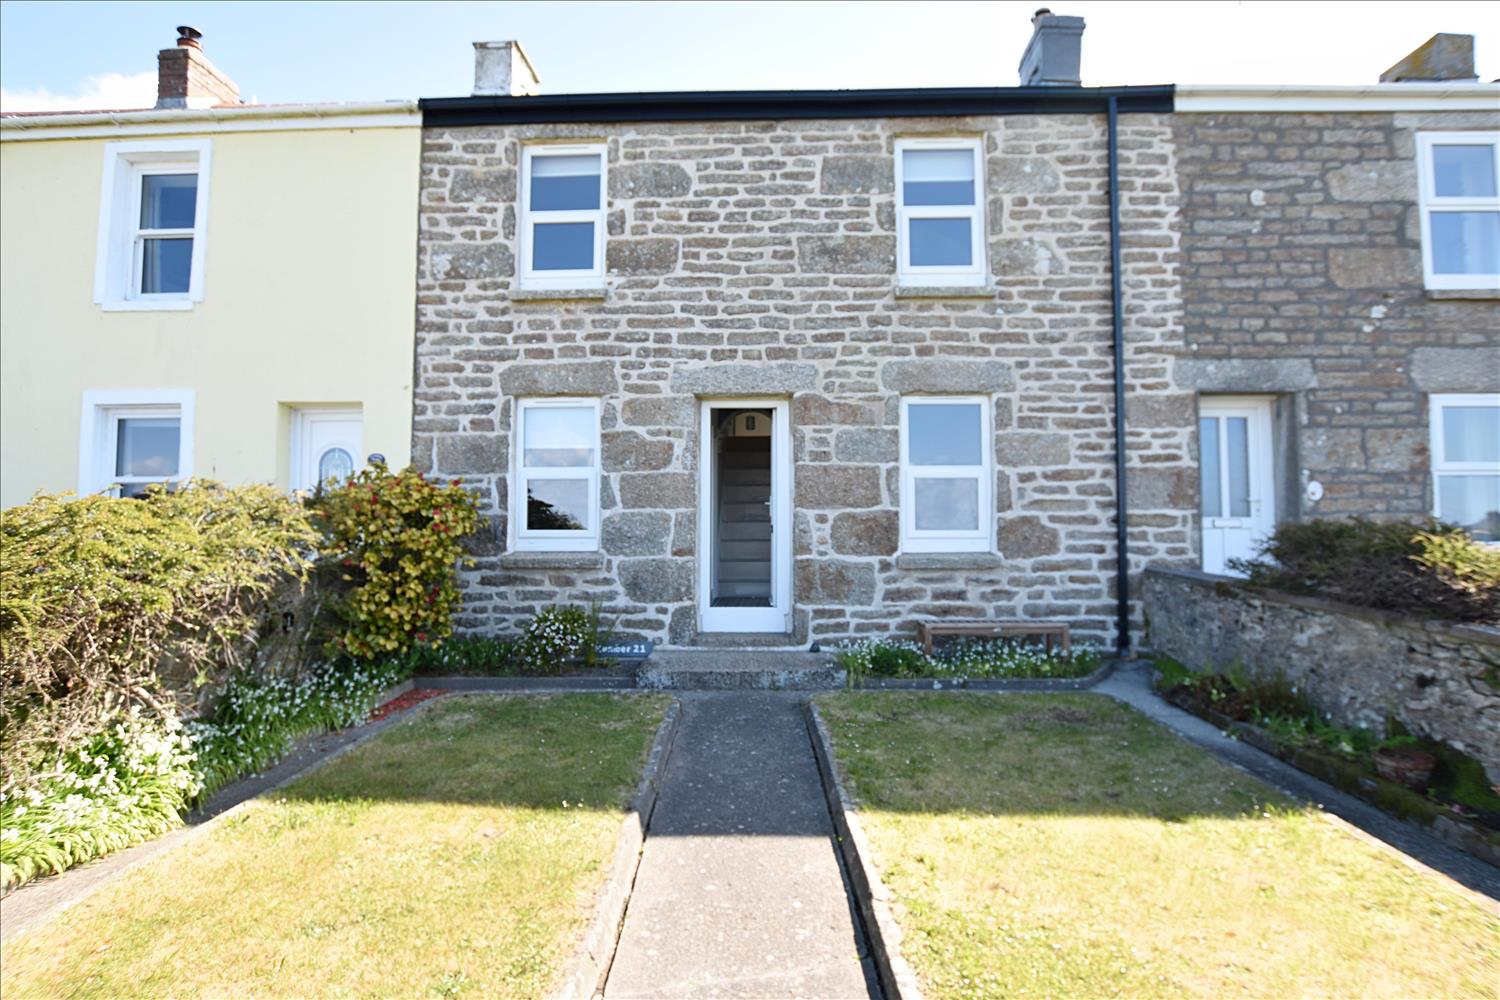 NUMBER 21, ST JUST Cottage for rent in Penzance, Cornwall